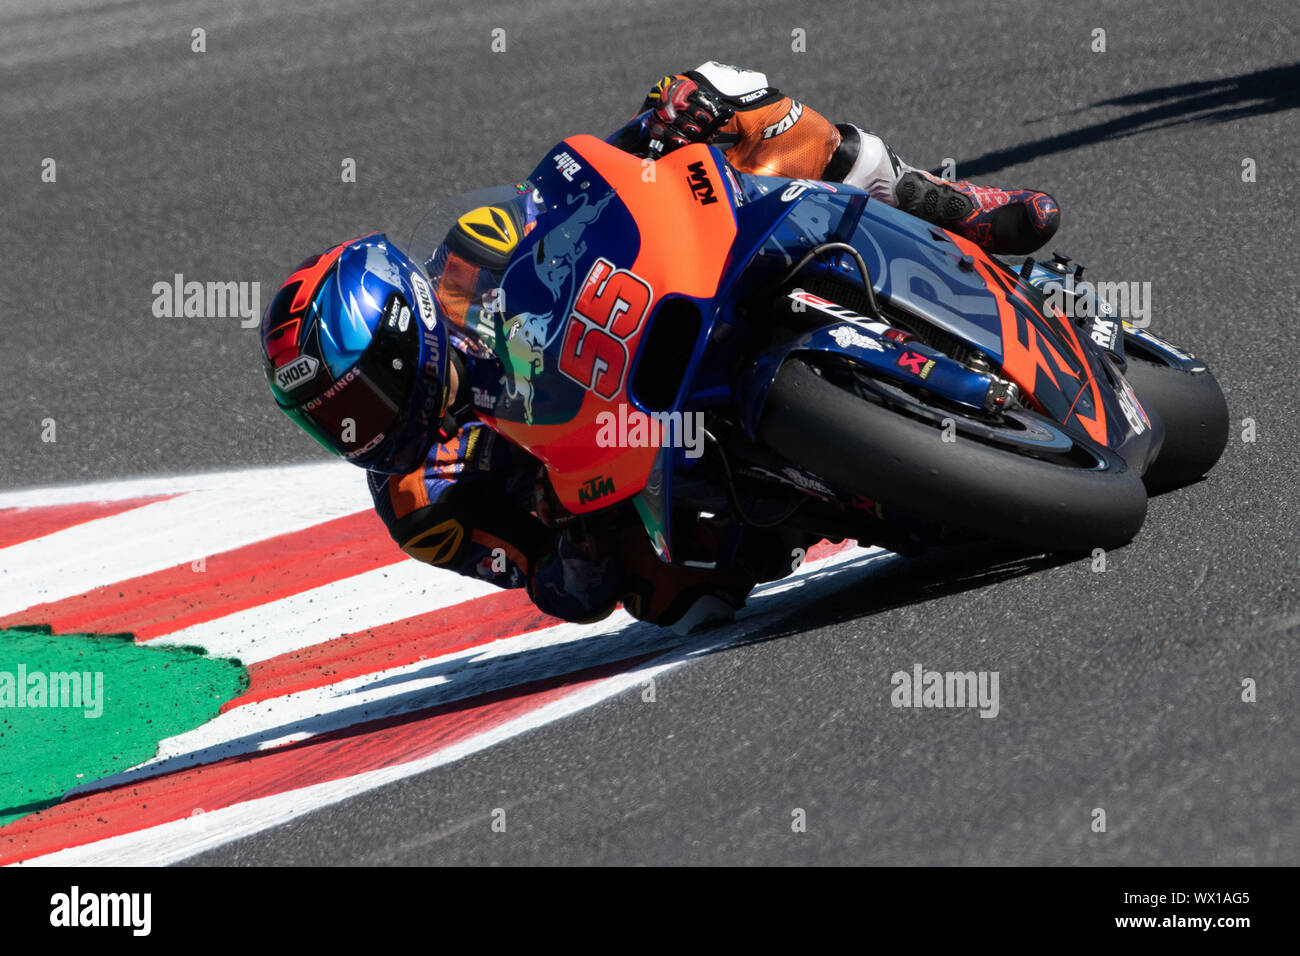 HAFIZH SYAHRIN, MALAYSIAN RIDER NUMBER 55 FOR KTM REDBULL TECH 3 IN MOTOGP  during Saturday Free Practice & Qualifications Of The Motogp Of San Marino  Stock Photo - Alamy